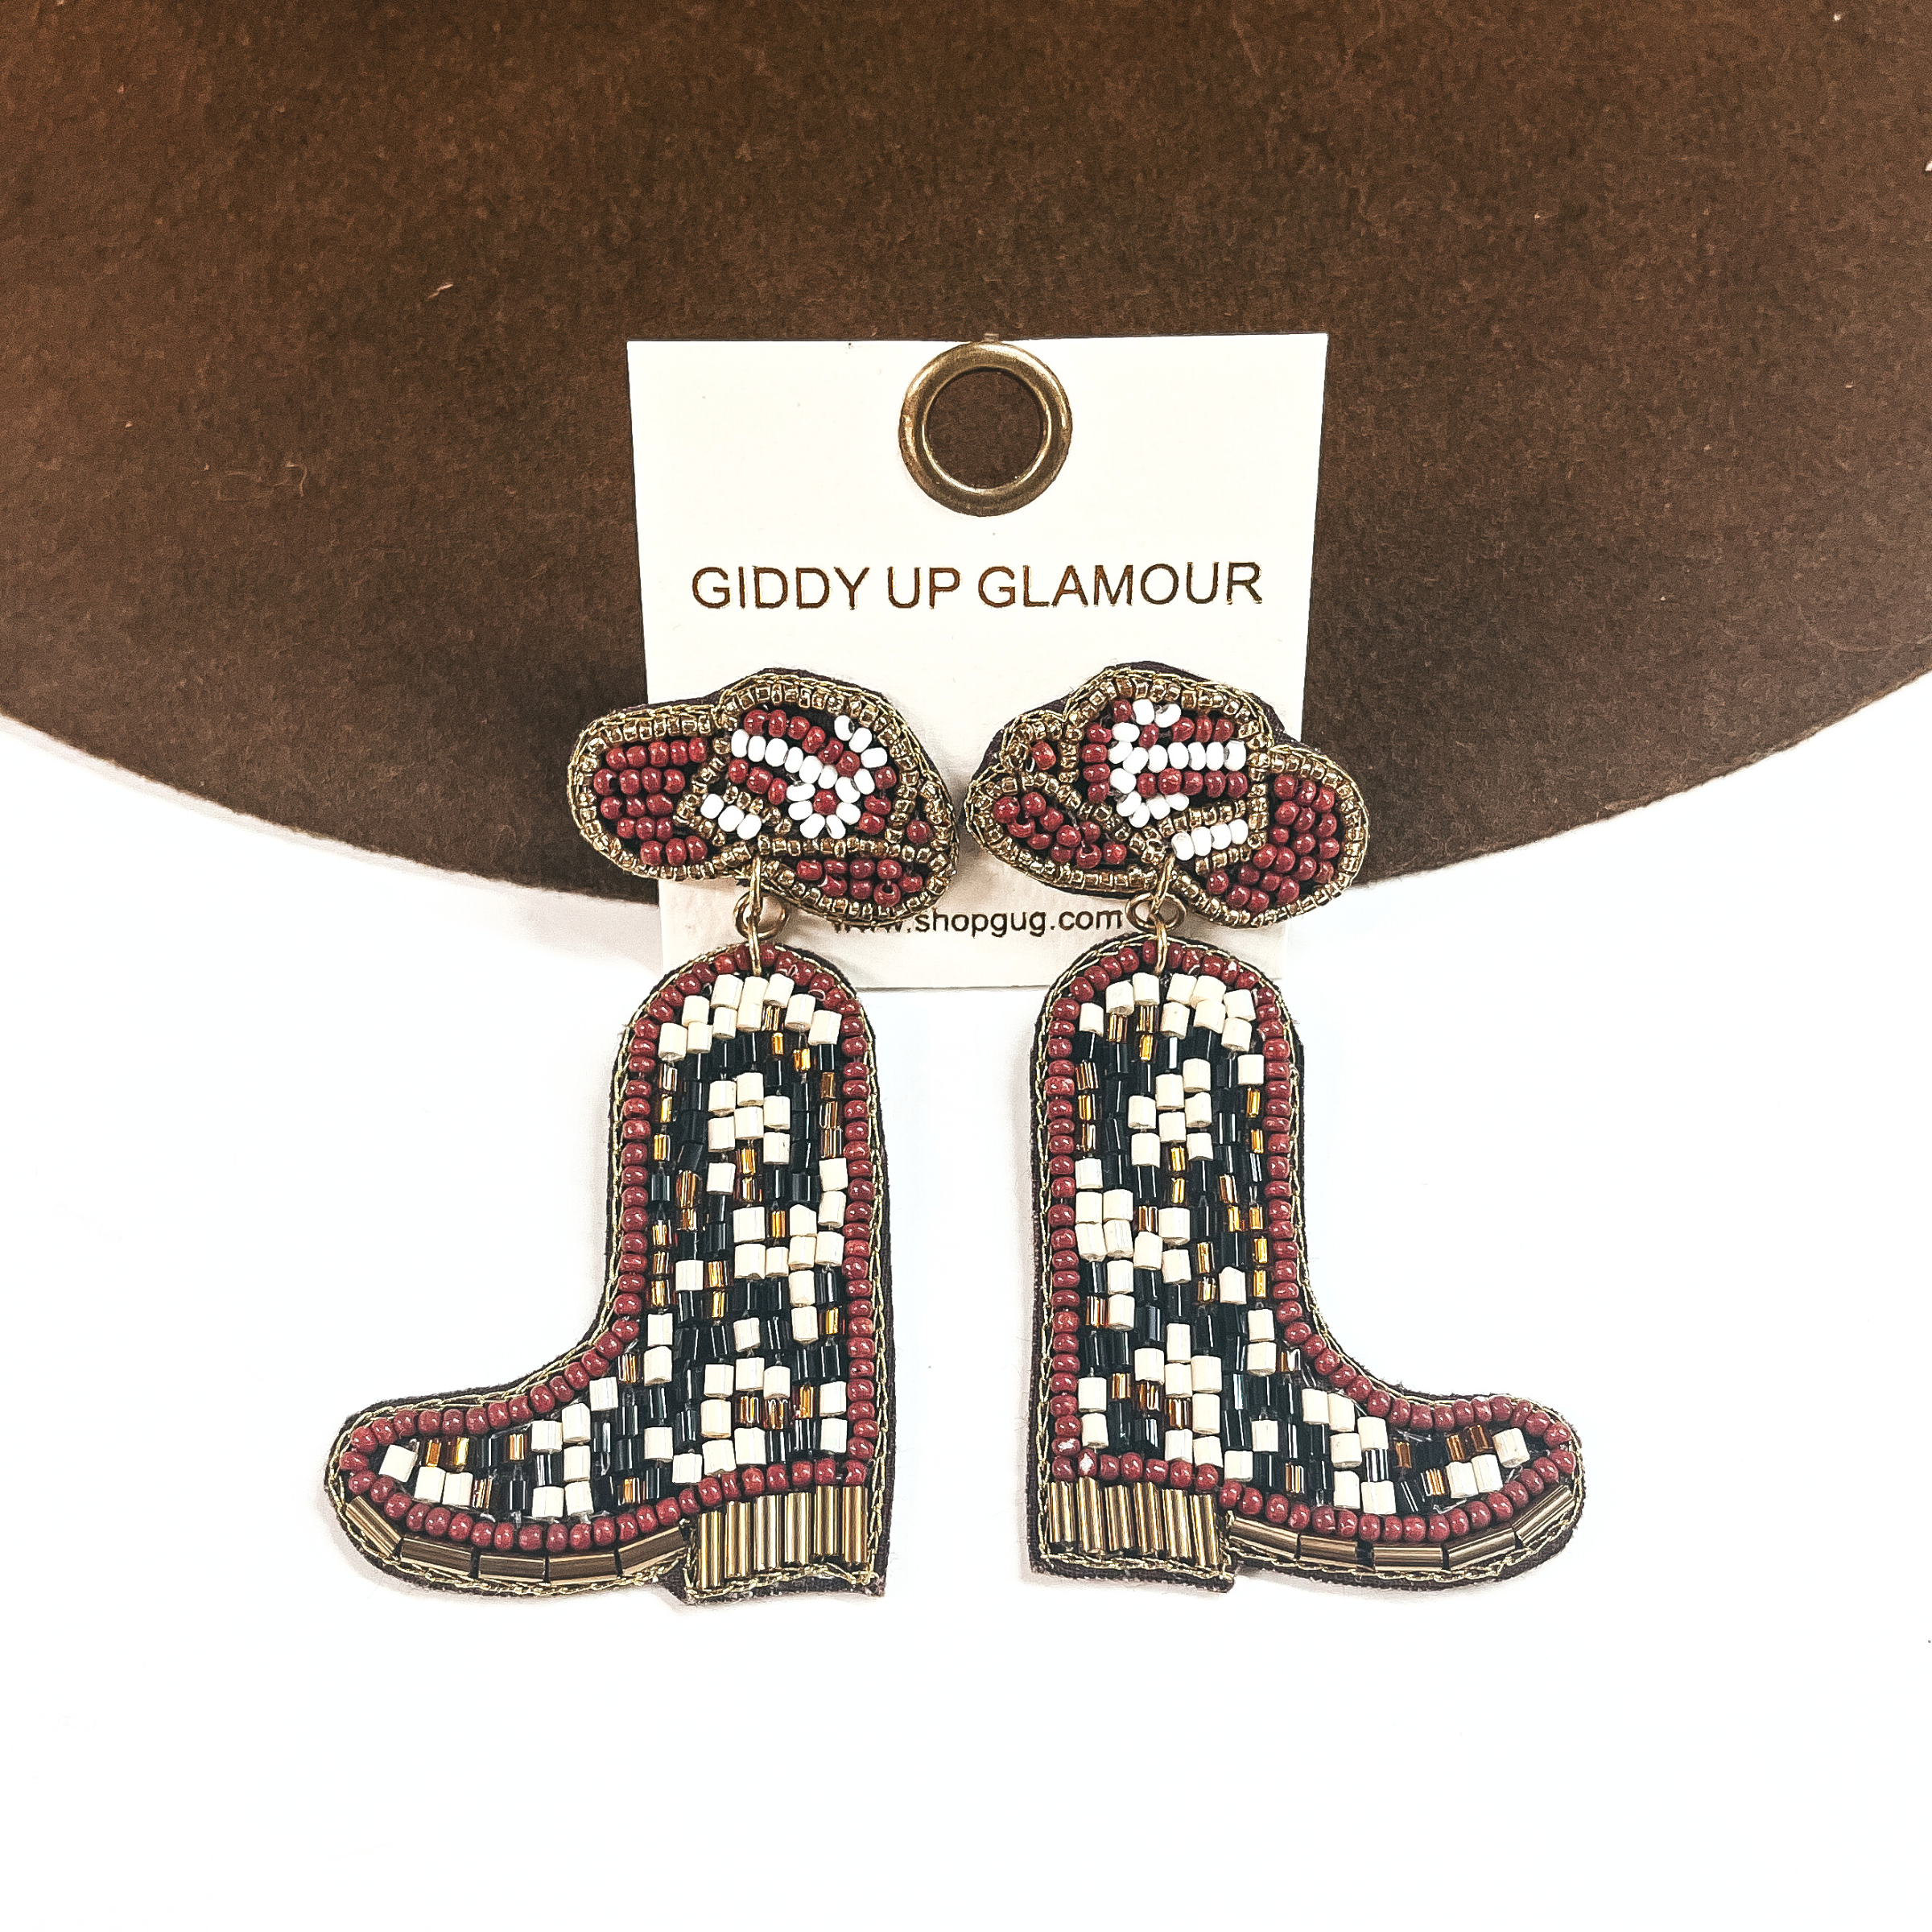 These are hat and boot beaded earrings in brown, white, gold, and black. The hat is the postback in brown and white with gold beads all around. There is a boot drop with a gold beaded sole. These earrings are leaning up against a dark brown felt hat brim and on a white background.